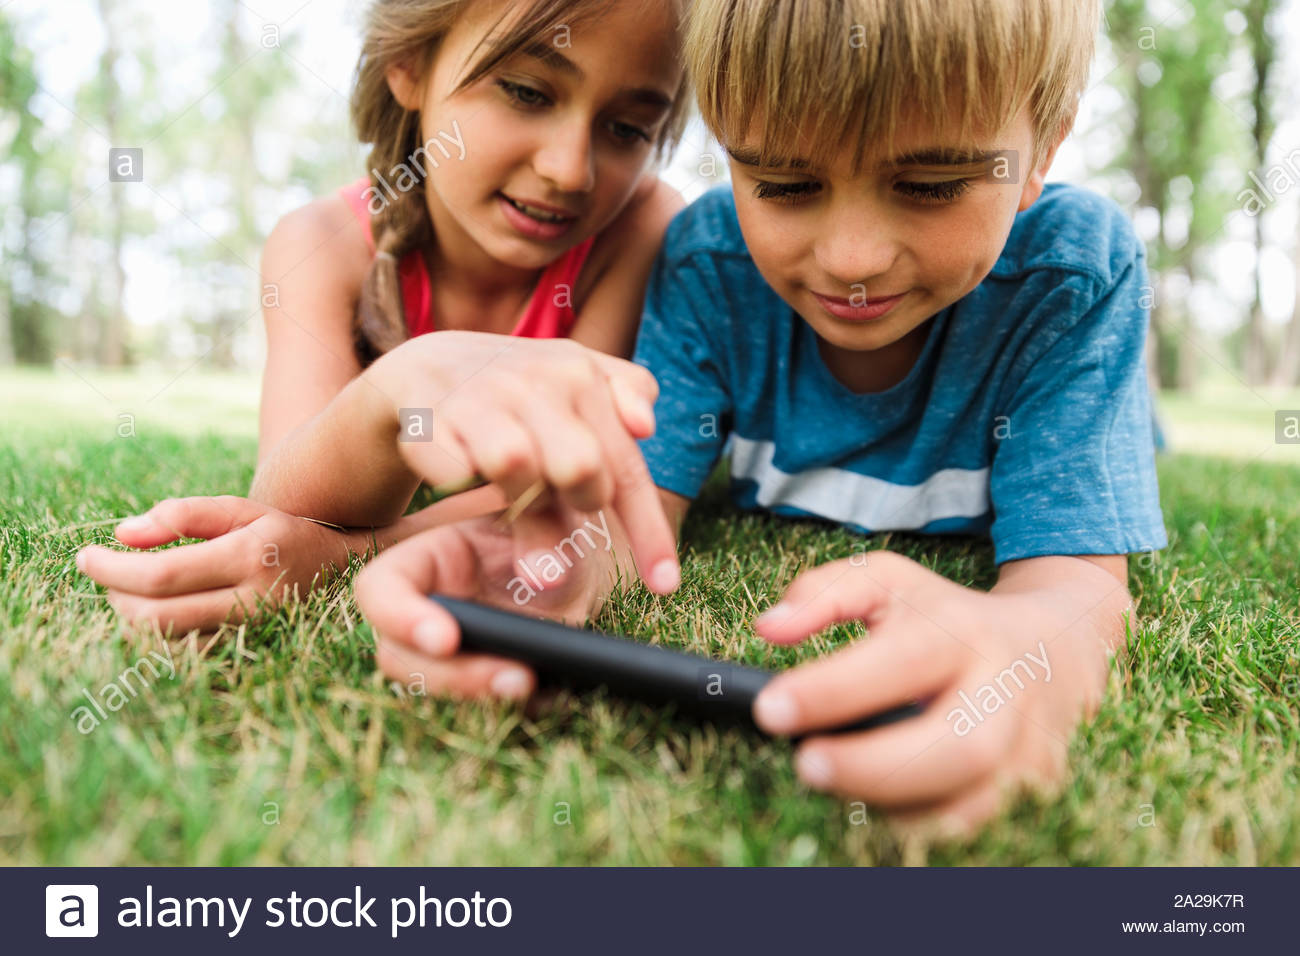 Boy and girl lying on grass using smartphone Stock Photo